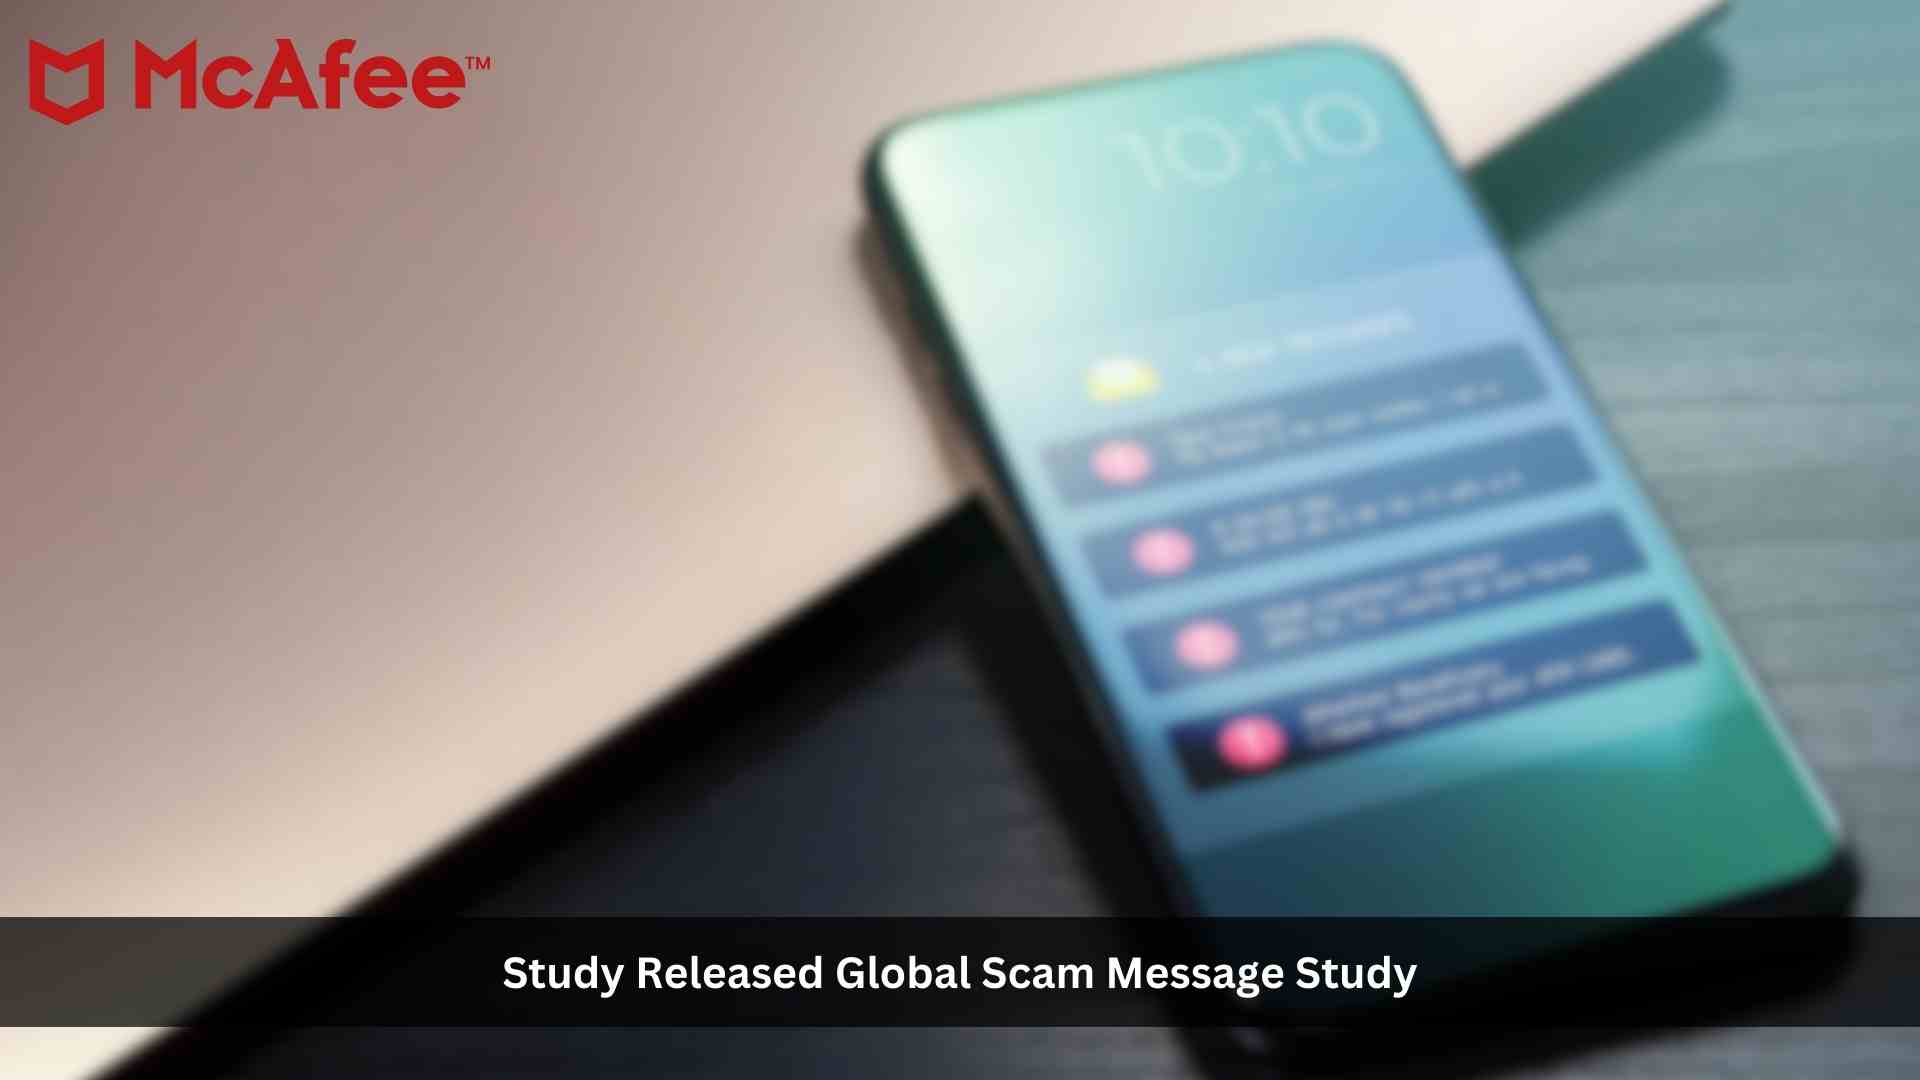 McAfee’s 2023 Scam Study Results: Scam Texts More Painful Than Getting a Root Canal